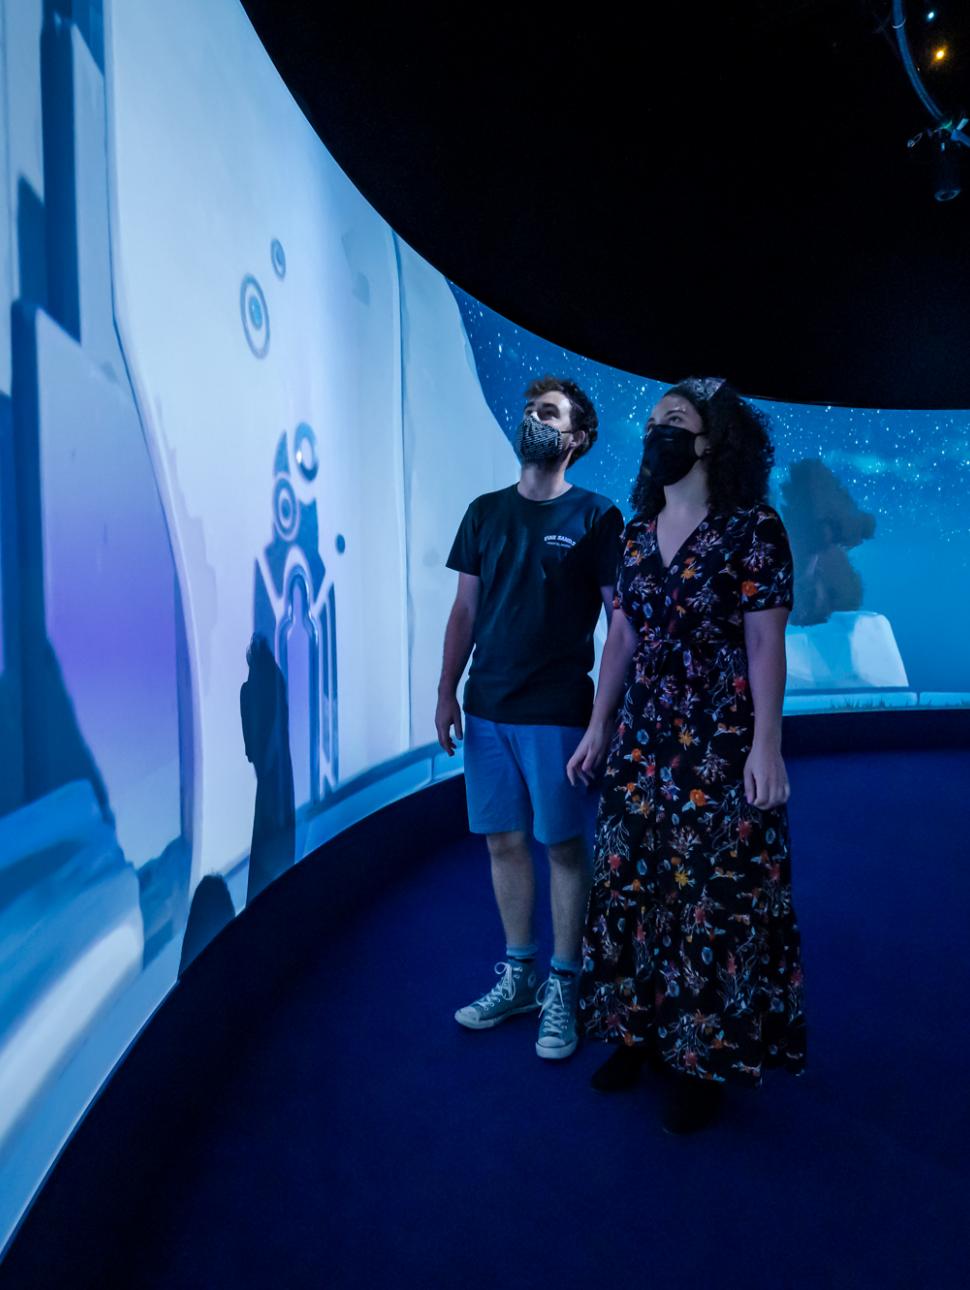 Two people look left to a digital wall, bathed in blue light